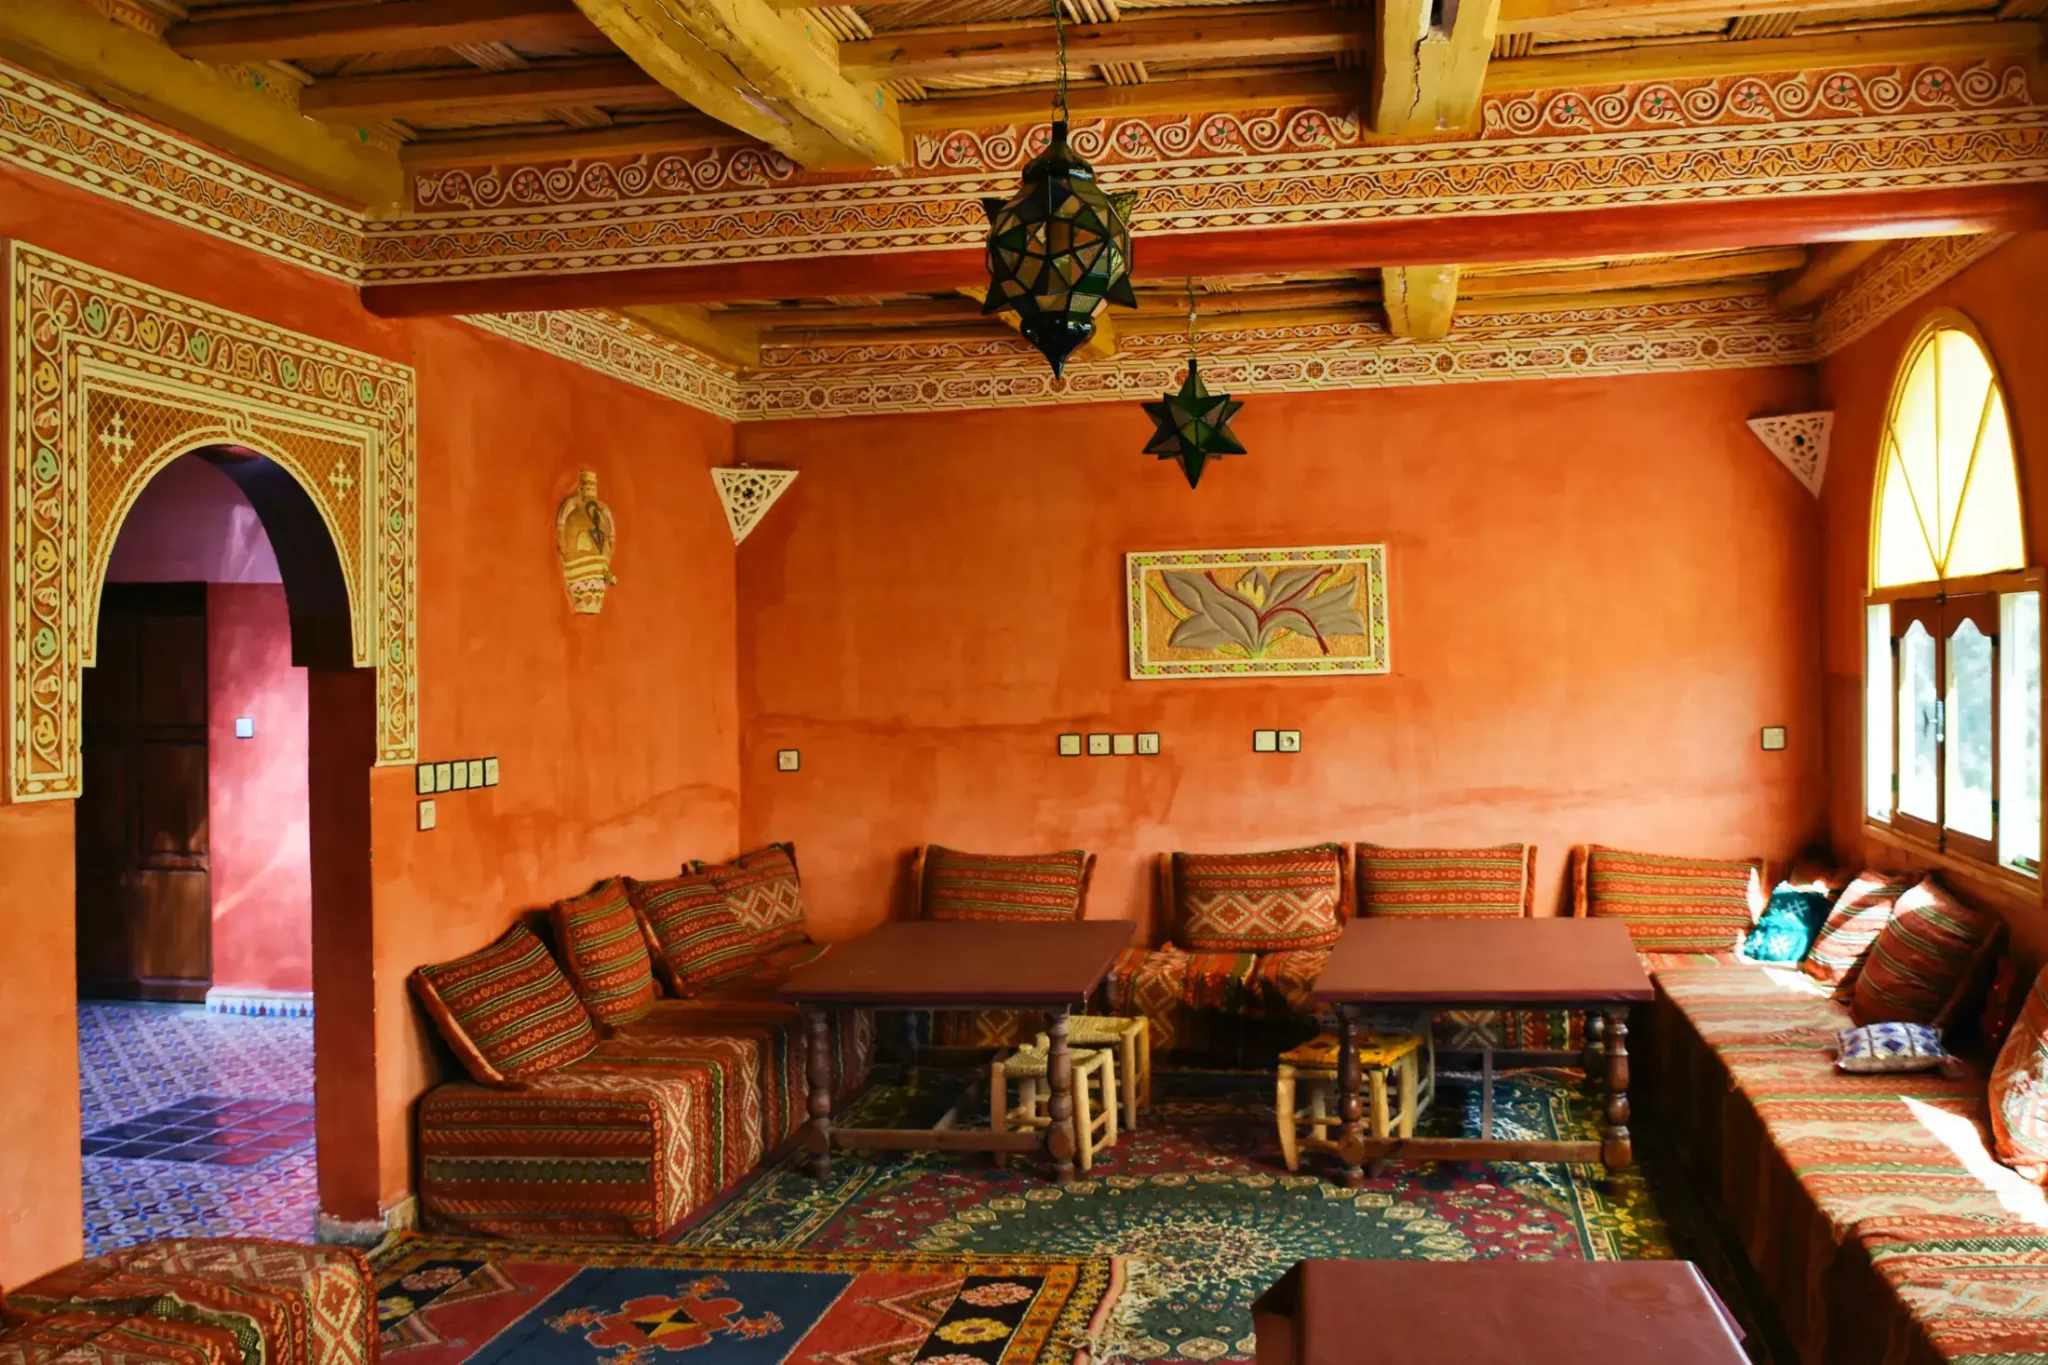 Moroccan home interior with fanoos lamps hanging from the ceiling.